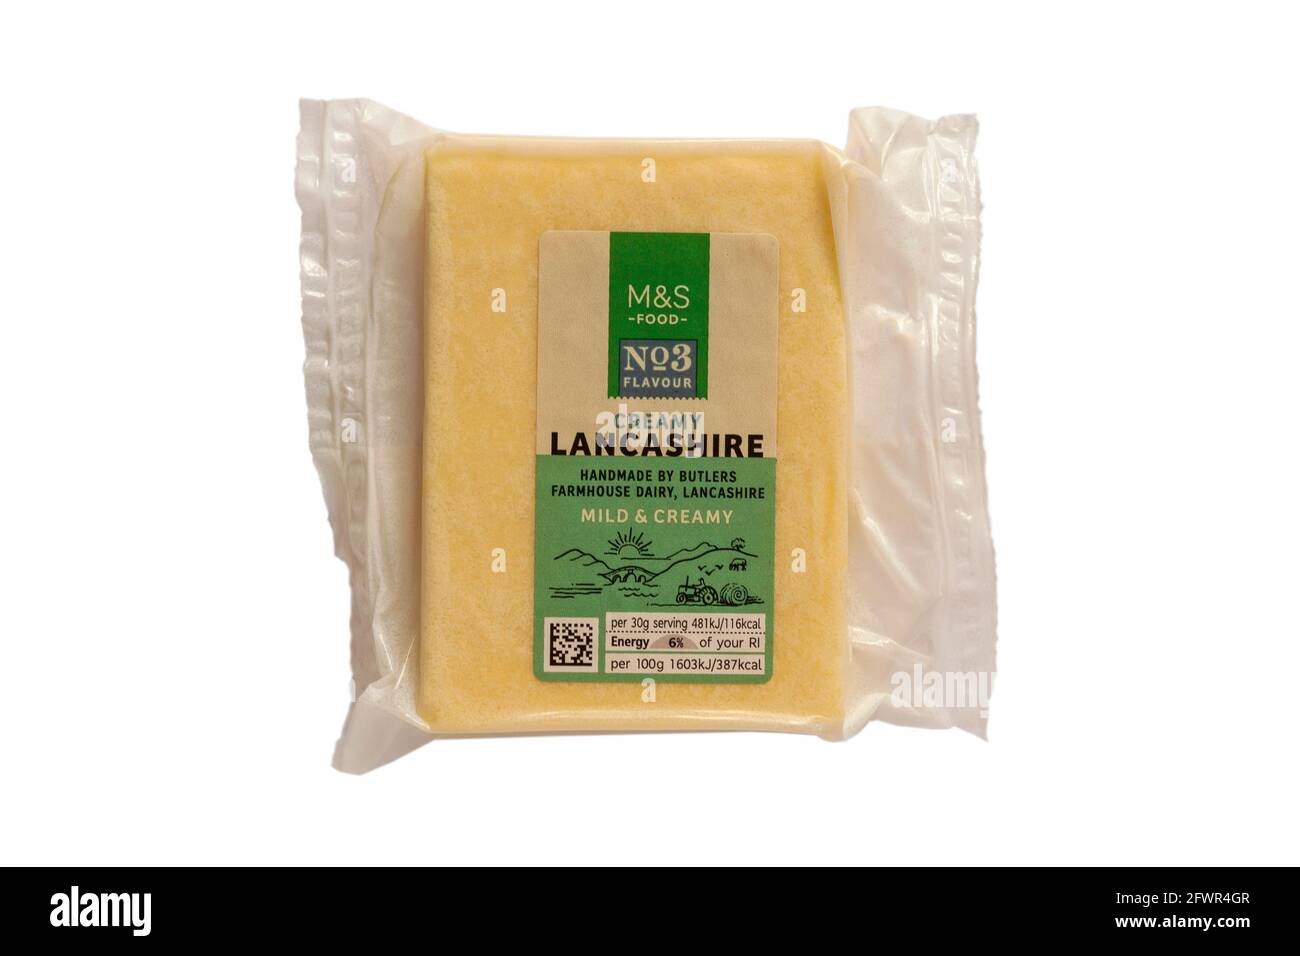 Pack of Creamy Lancashire Cheese mild & creamy from M&S isolated on white background - handmade by Butlers Farmhouse Dairy Lancashire Stock Photo